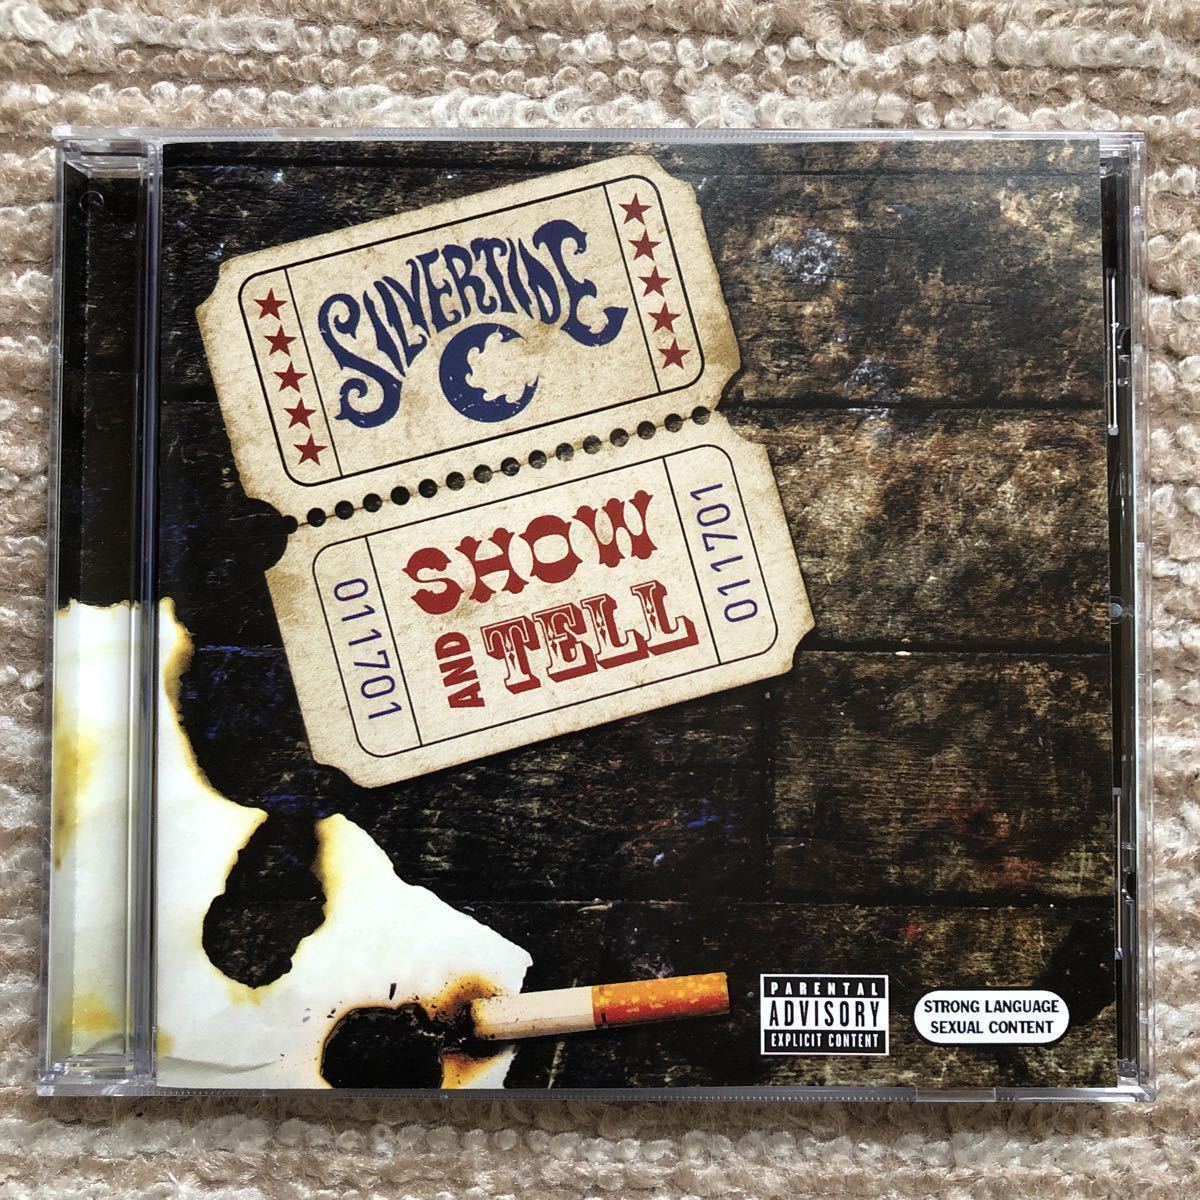 SILVERTIDE シルヴァータイド『SHOW AND TELL』品番82876-78949-2 輸入盤 中古美品_画像1